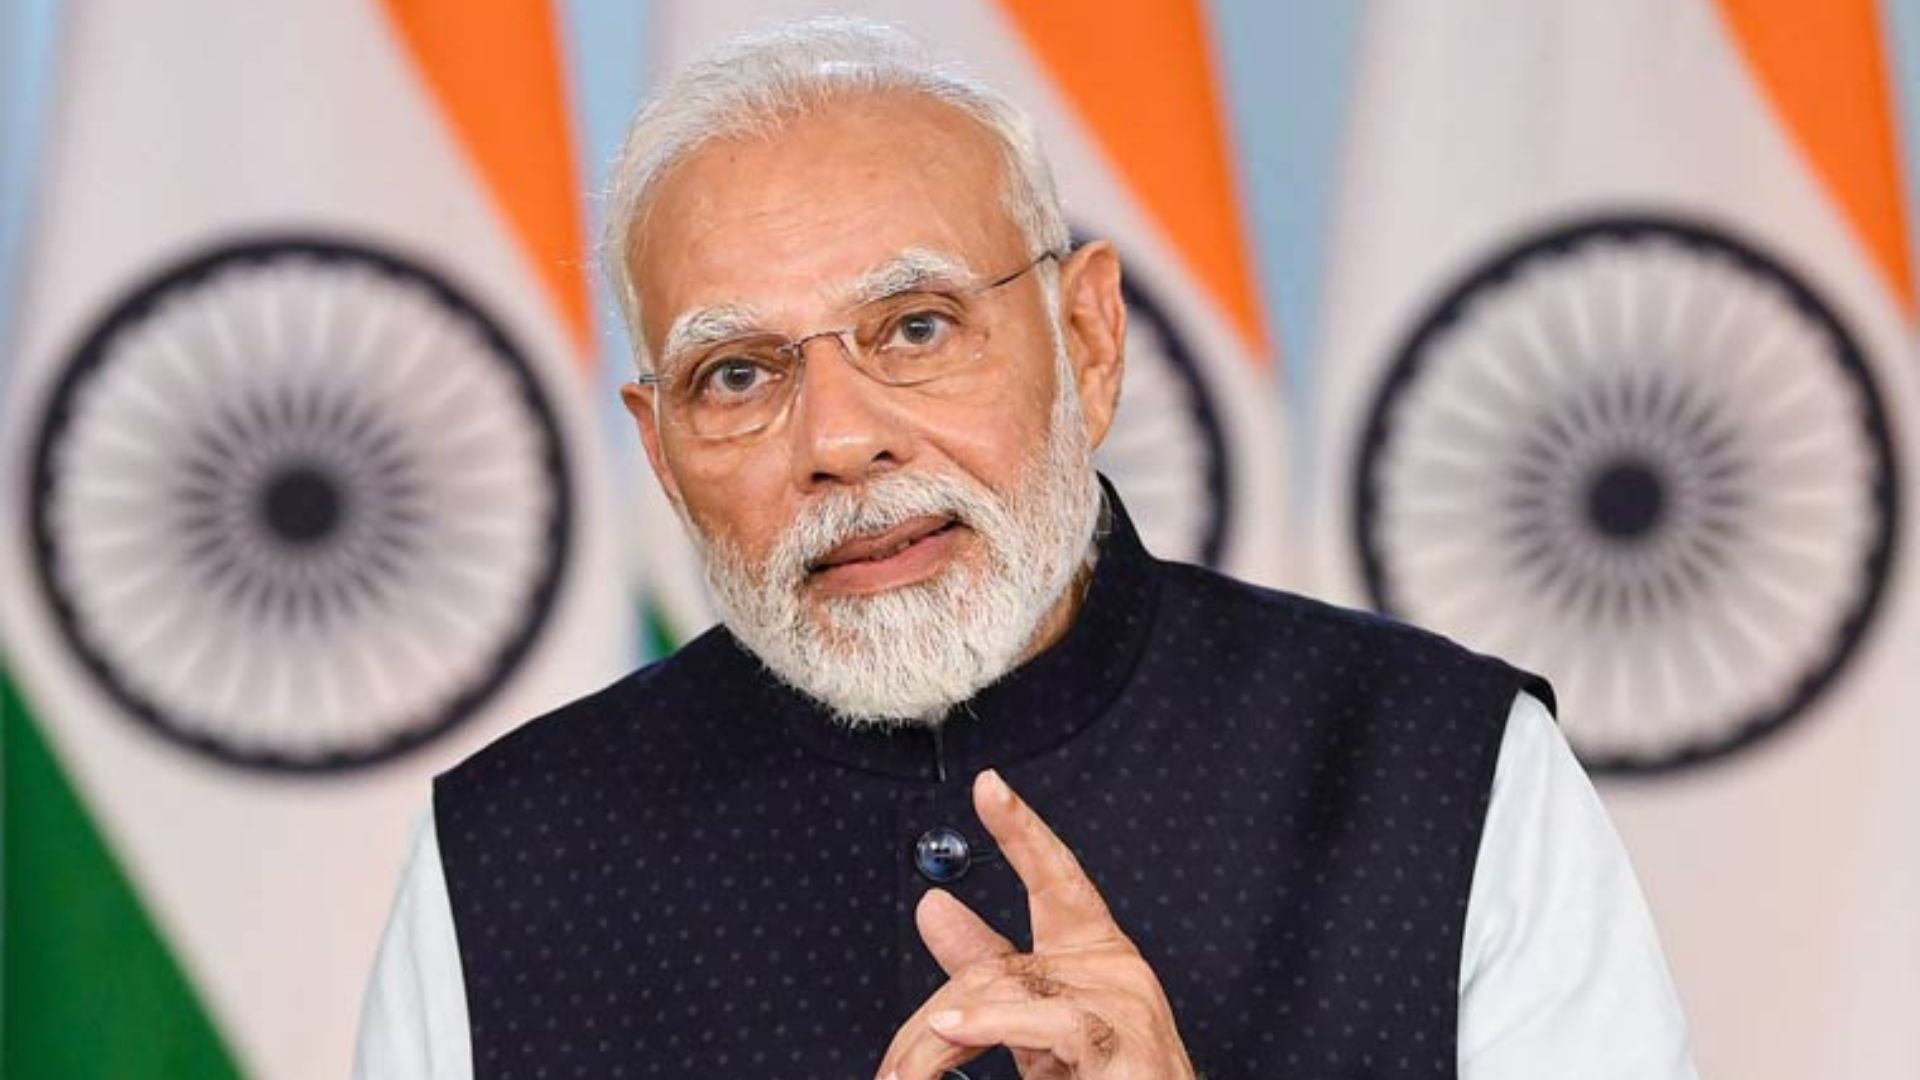 Telangana: PM Modi Unveils Projects Worth Over Rs 56,000 Cr In Adilabad